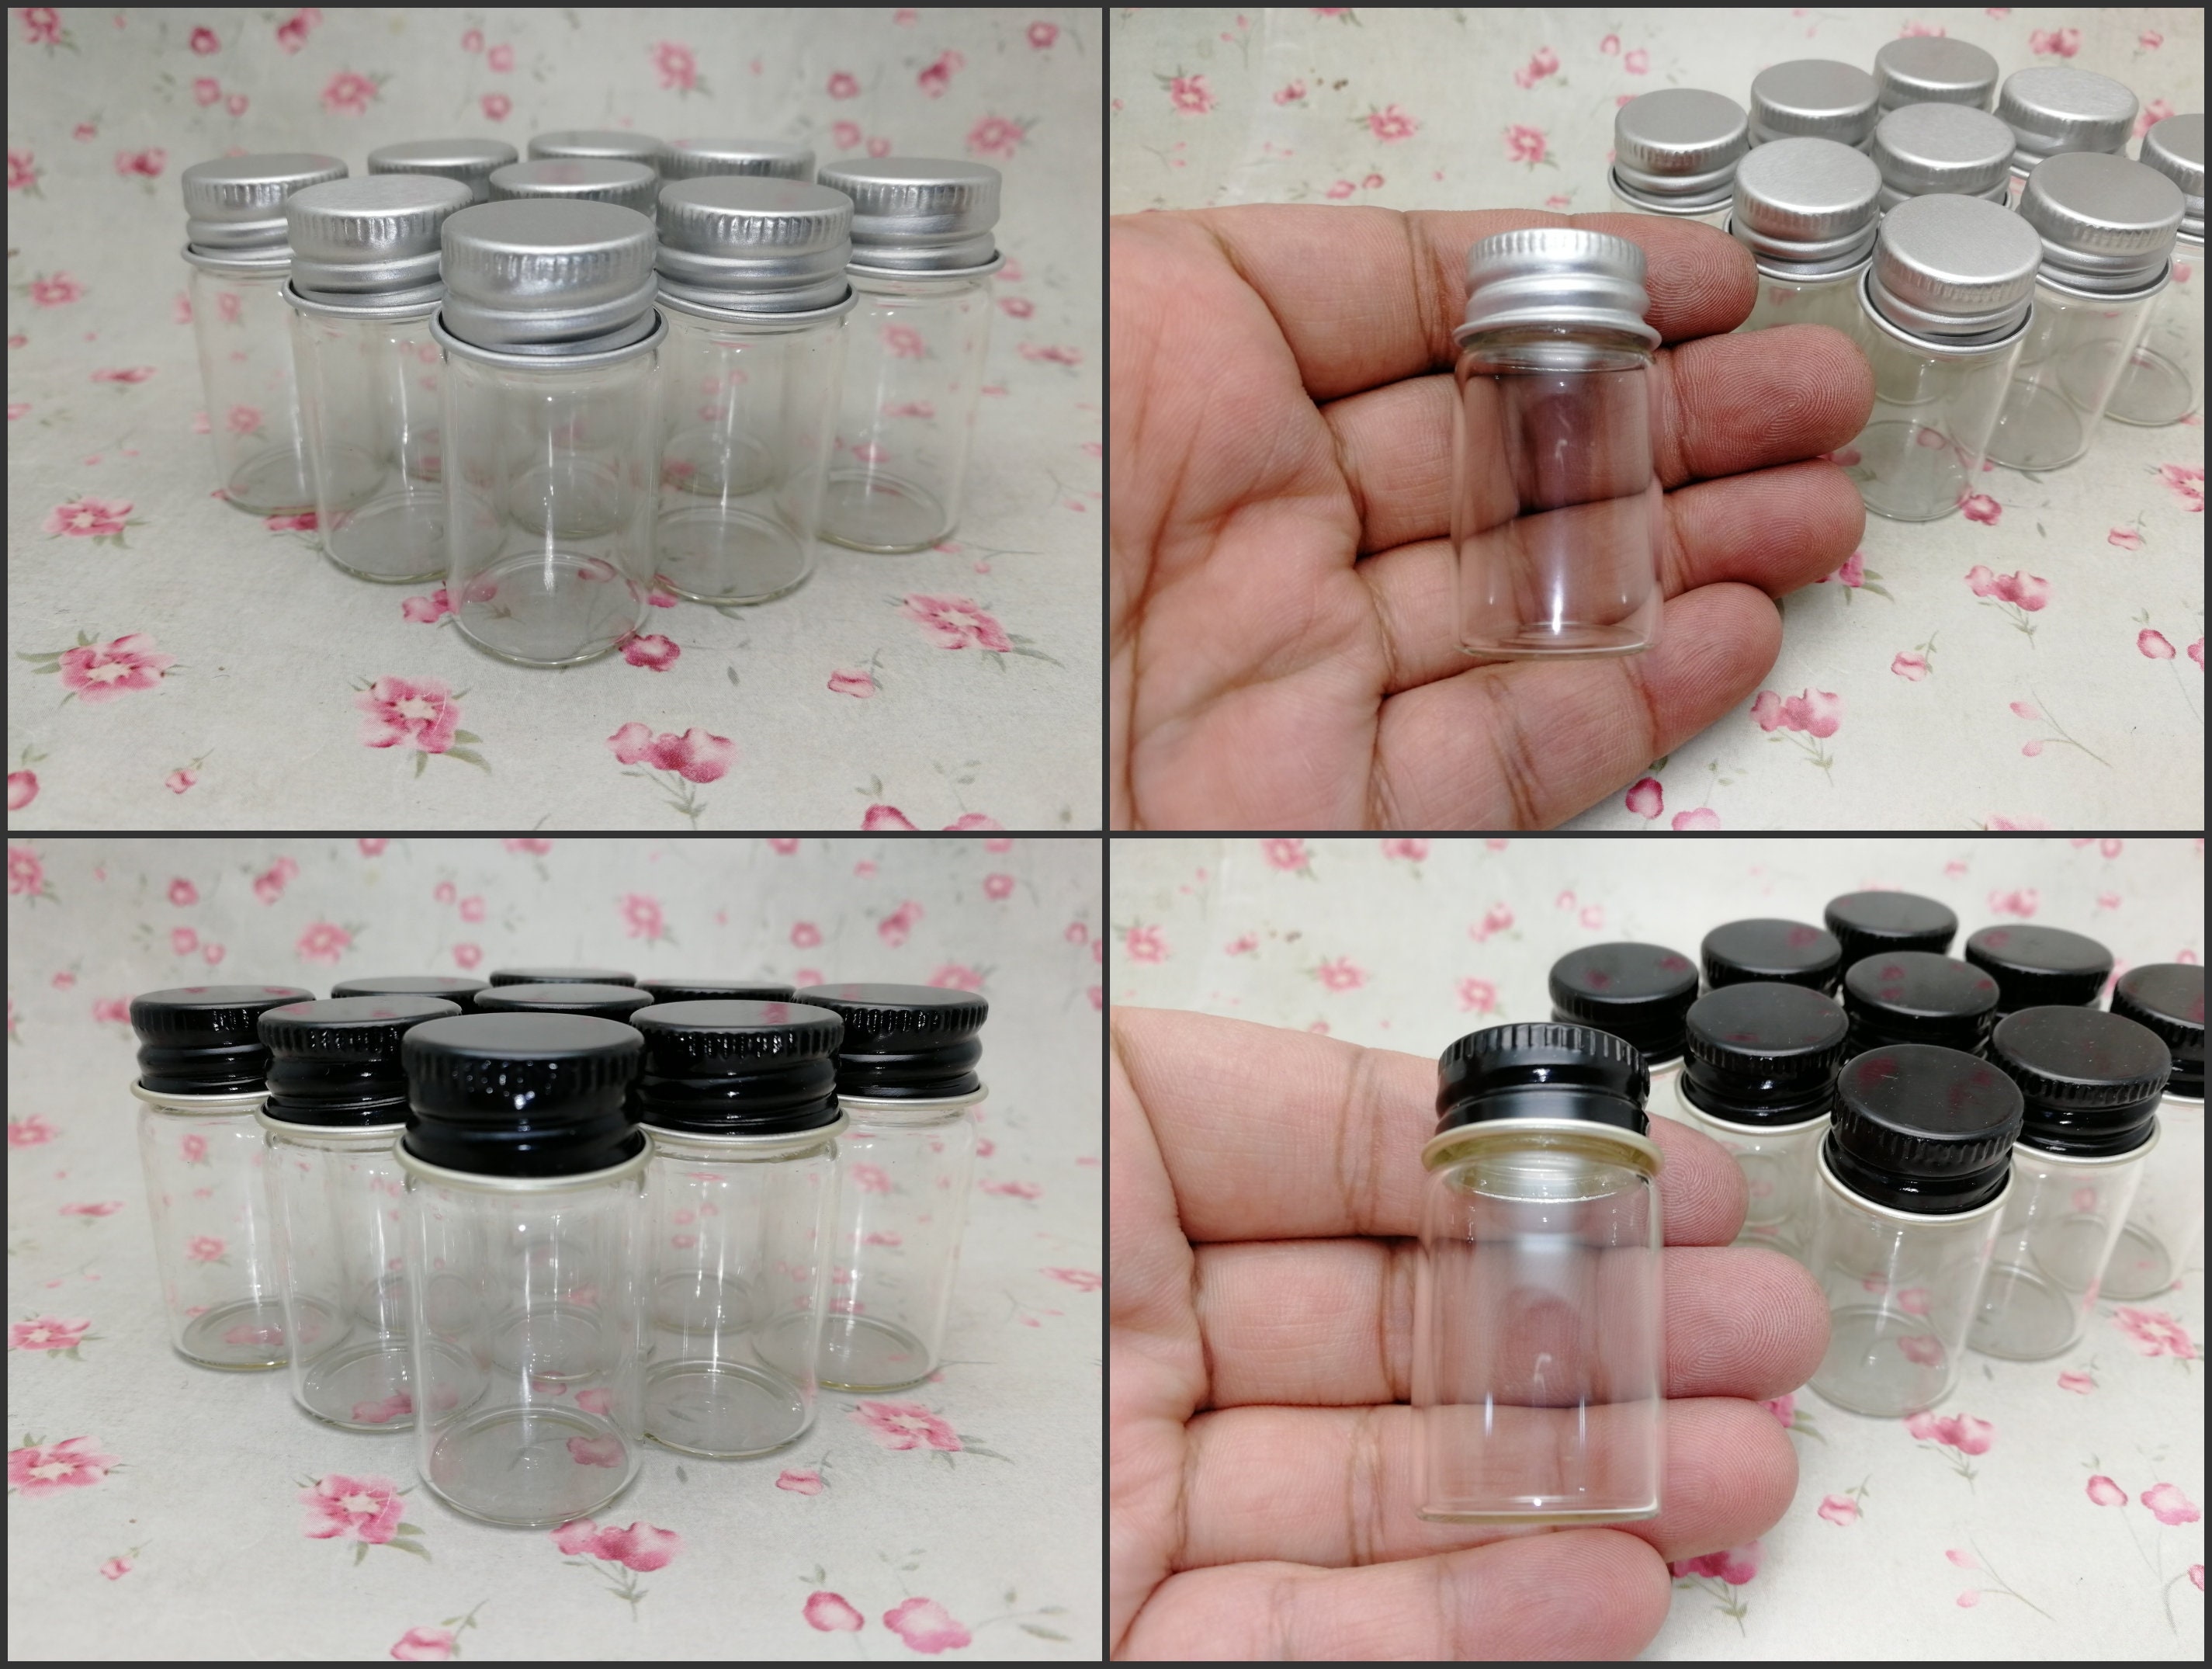 50 Pieces 22*40mm 8ml Small Glass Bottles Silver Screw Cap storage